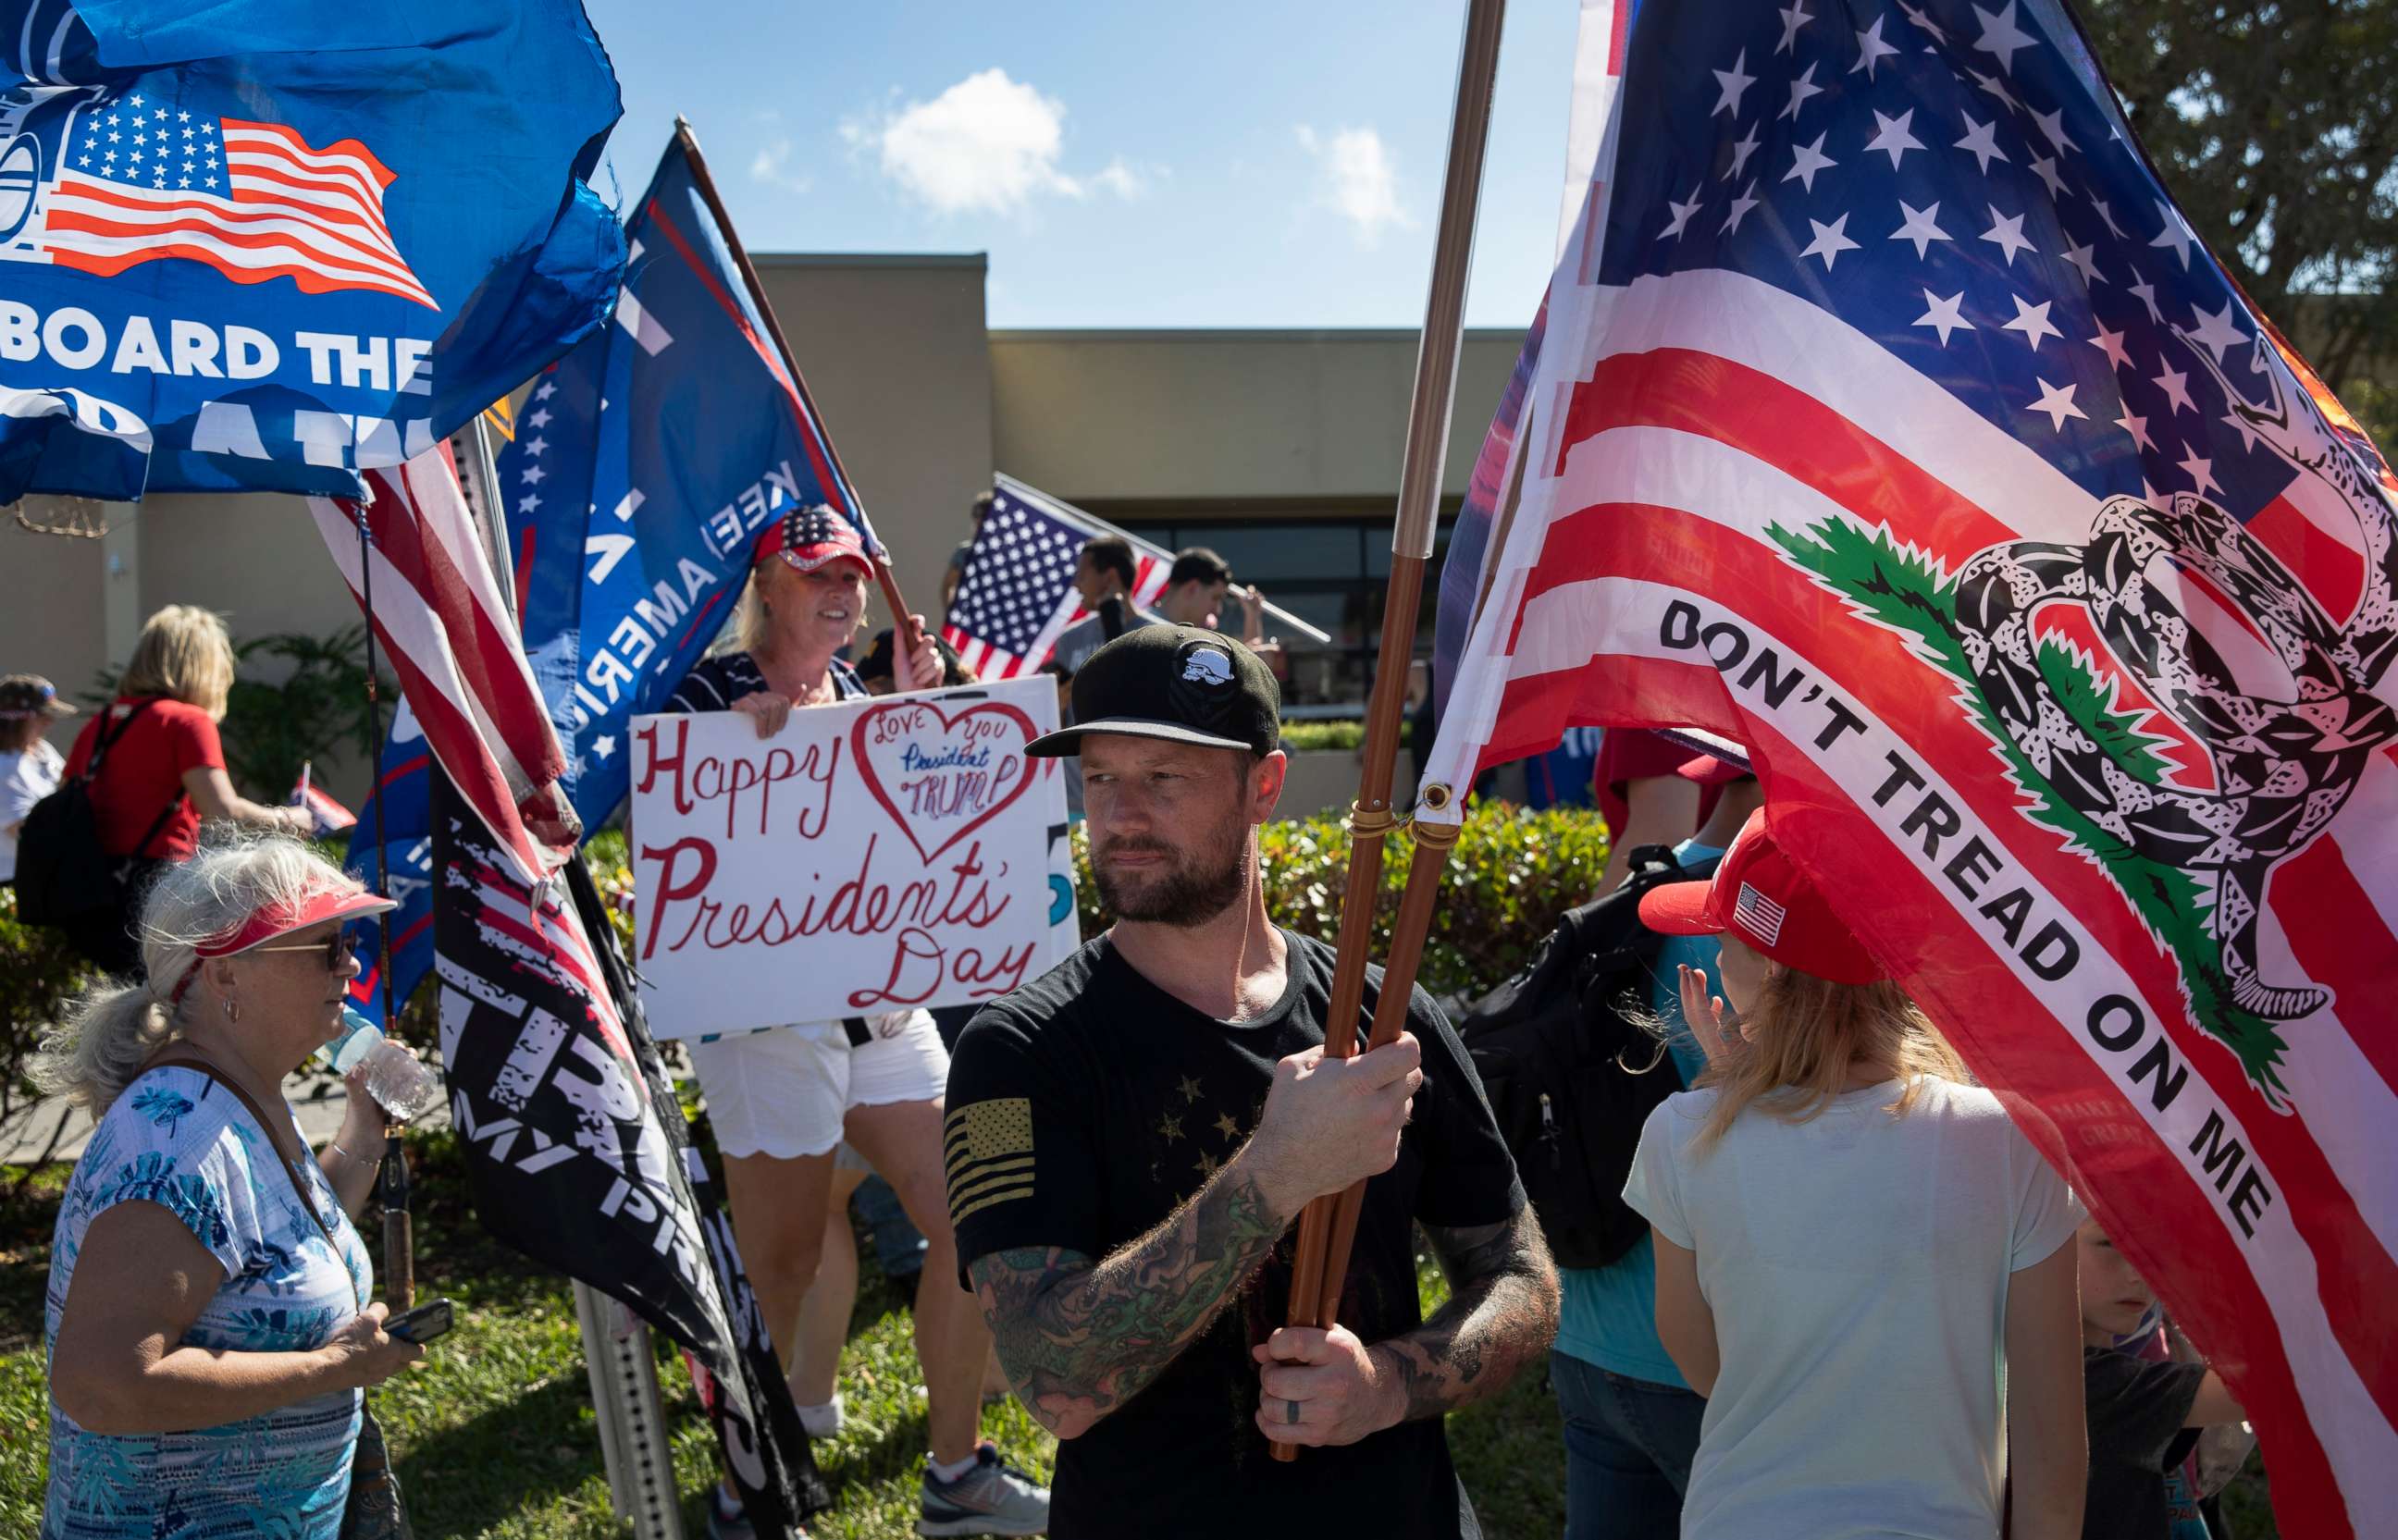 PHOTO: Supporters of former President Donald Trump gather along Southern Blvd near Trump's Mar-a-Lago home on Feb. 15, 2021, in West Palm Beach, Fla.